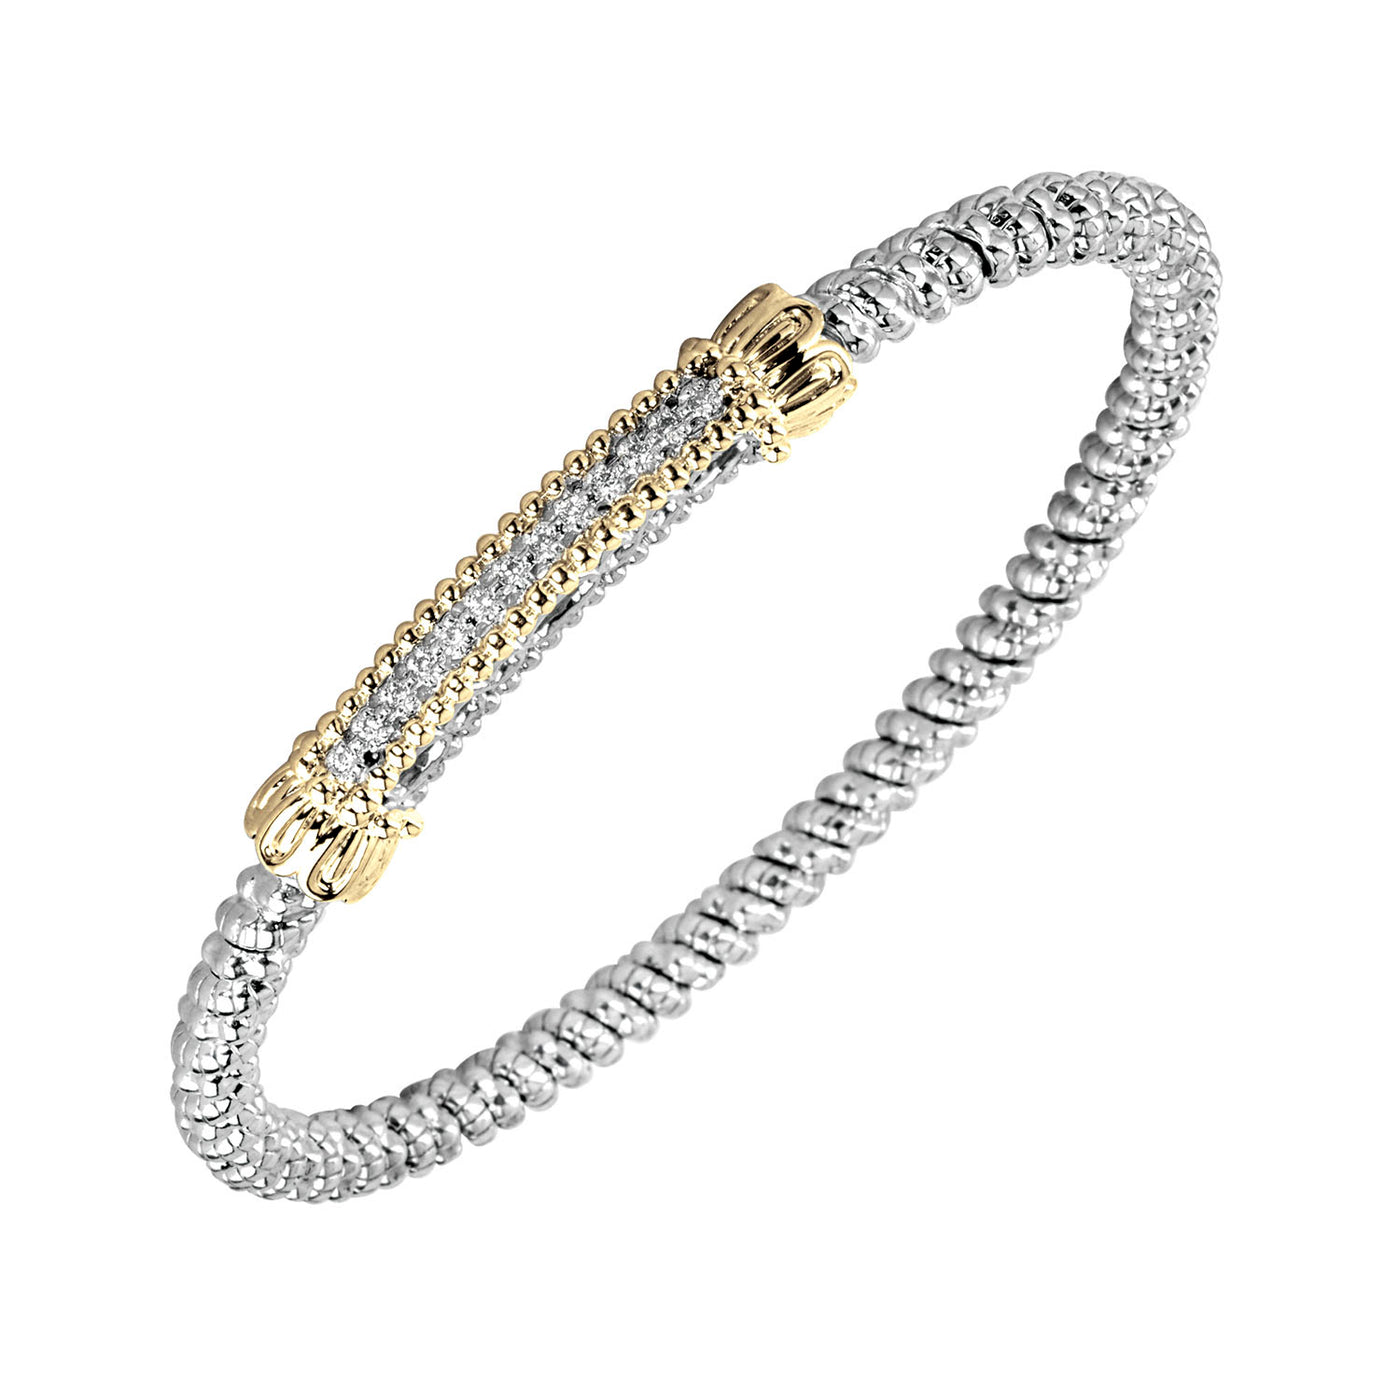 Vahan Sterling Silver and 14k Yellow Gold Moiré Beaded® Bangle Bracelet with Diamond – 22547D03